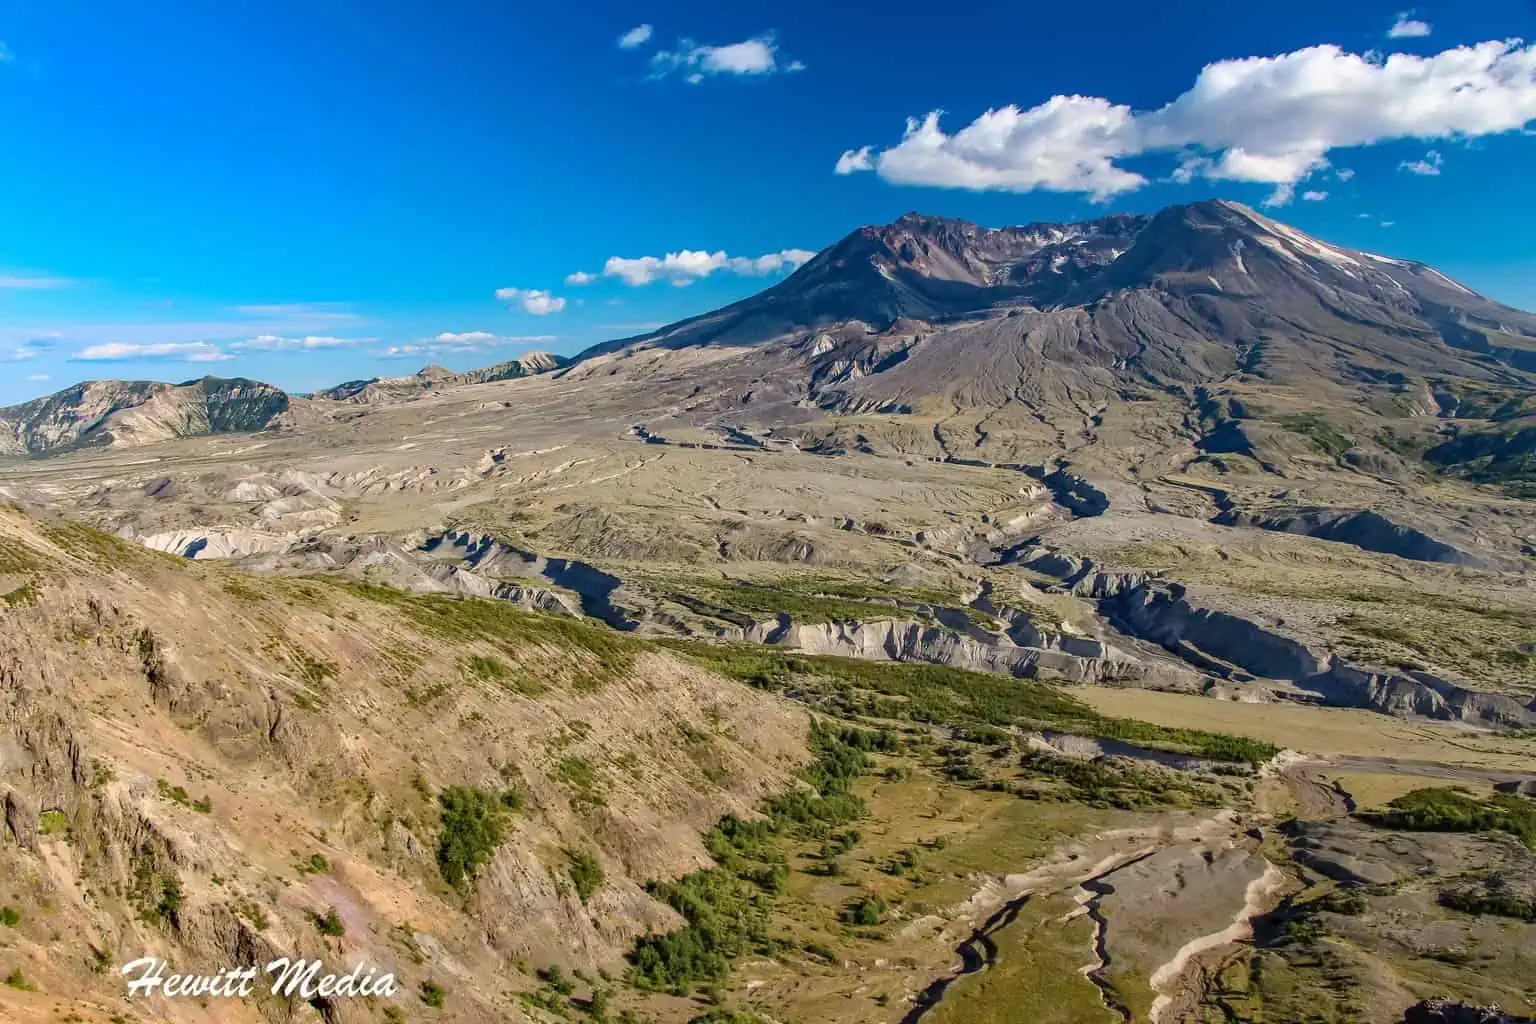 The All You Need Mount St. Helens Visitor Guide